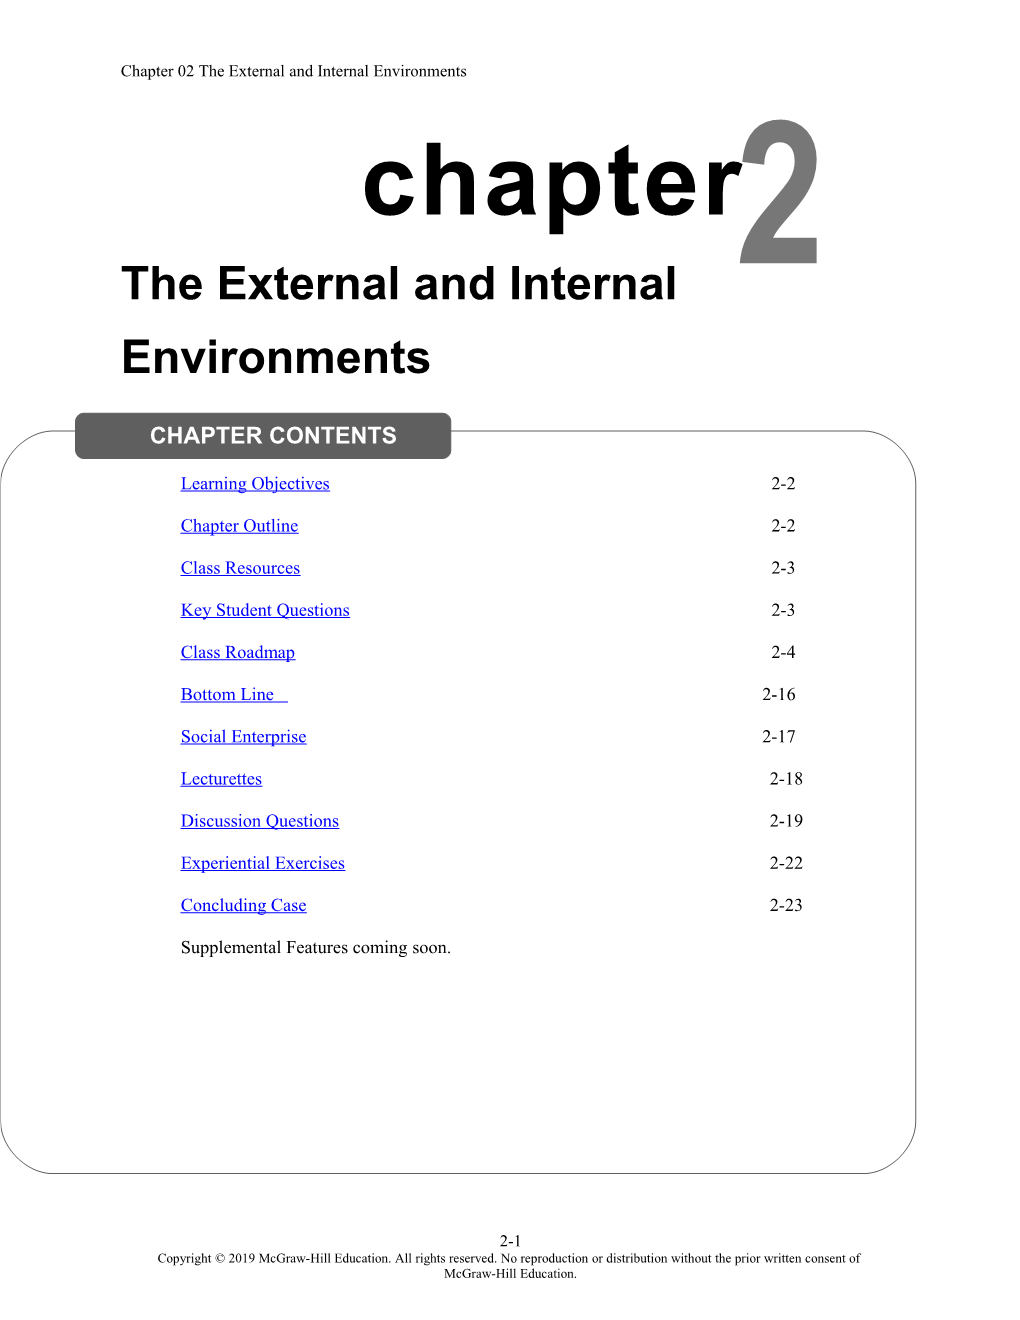 Chapter 02The External and Internal Environments